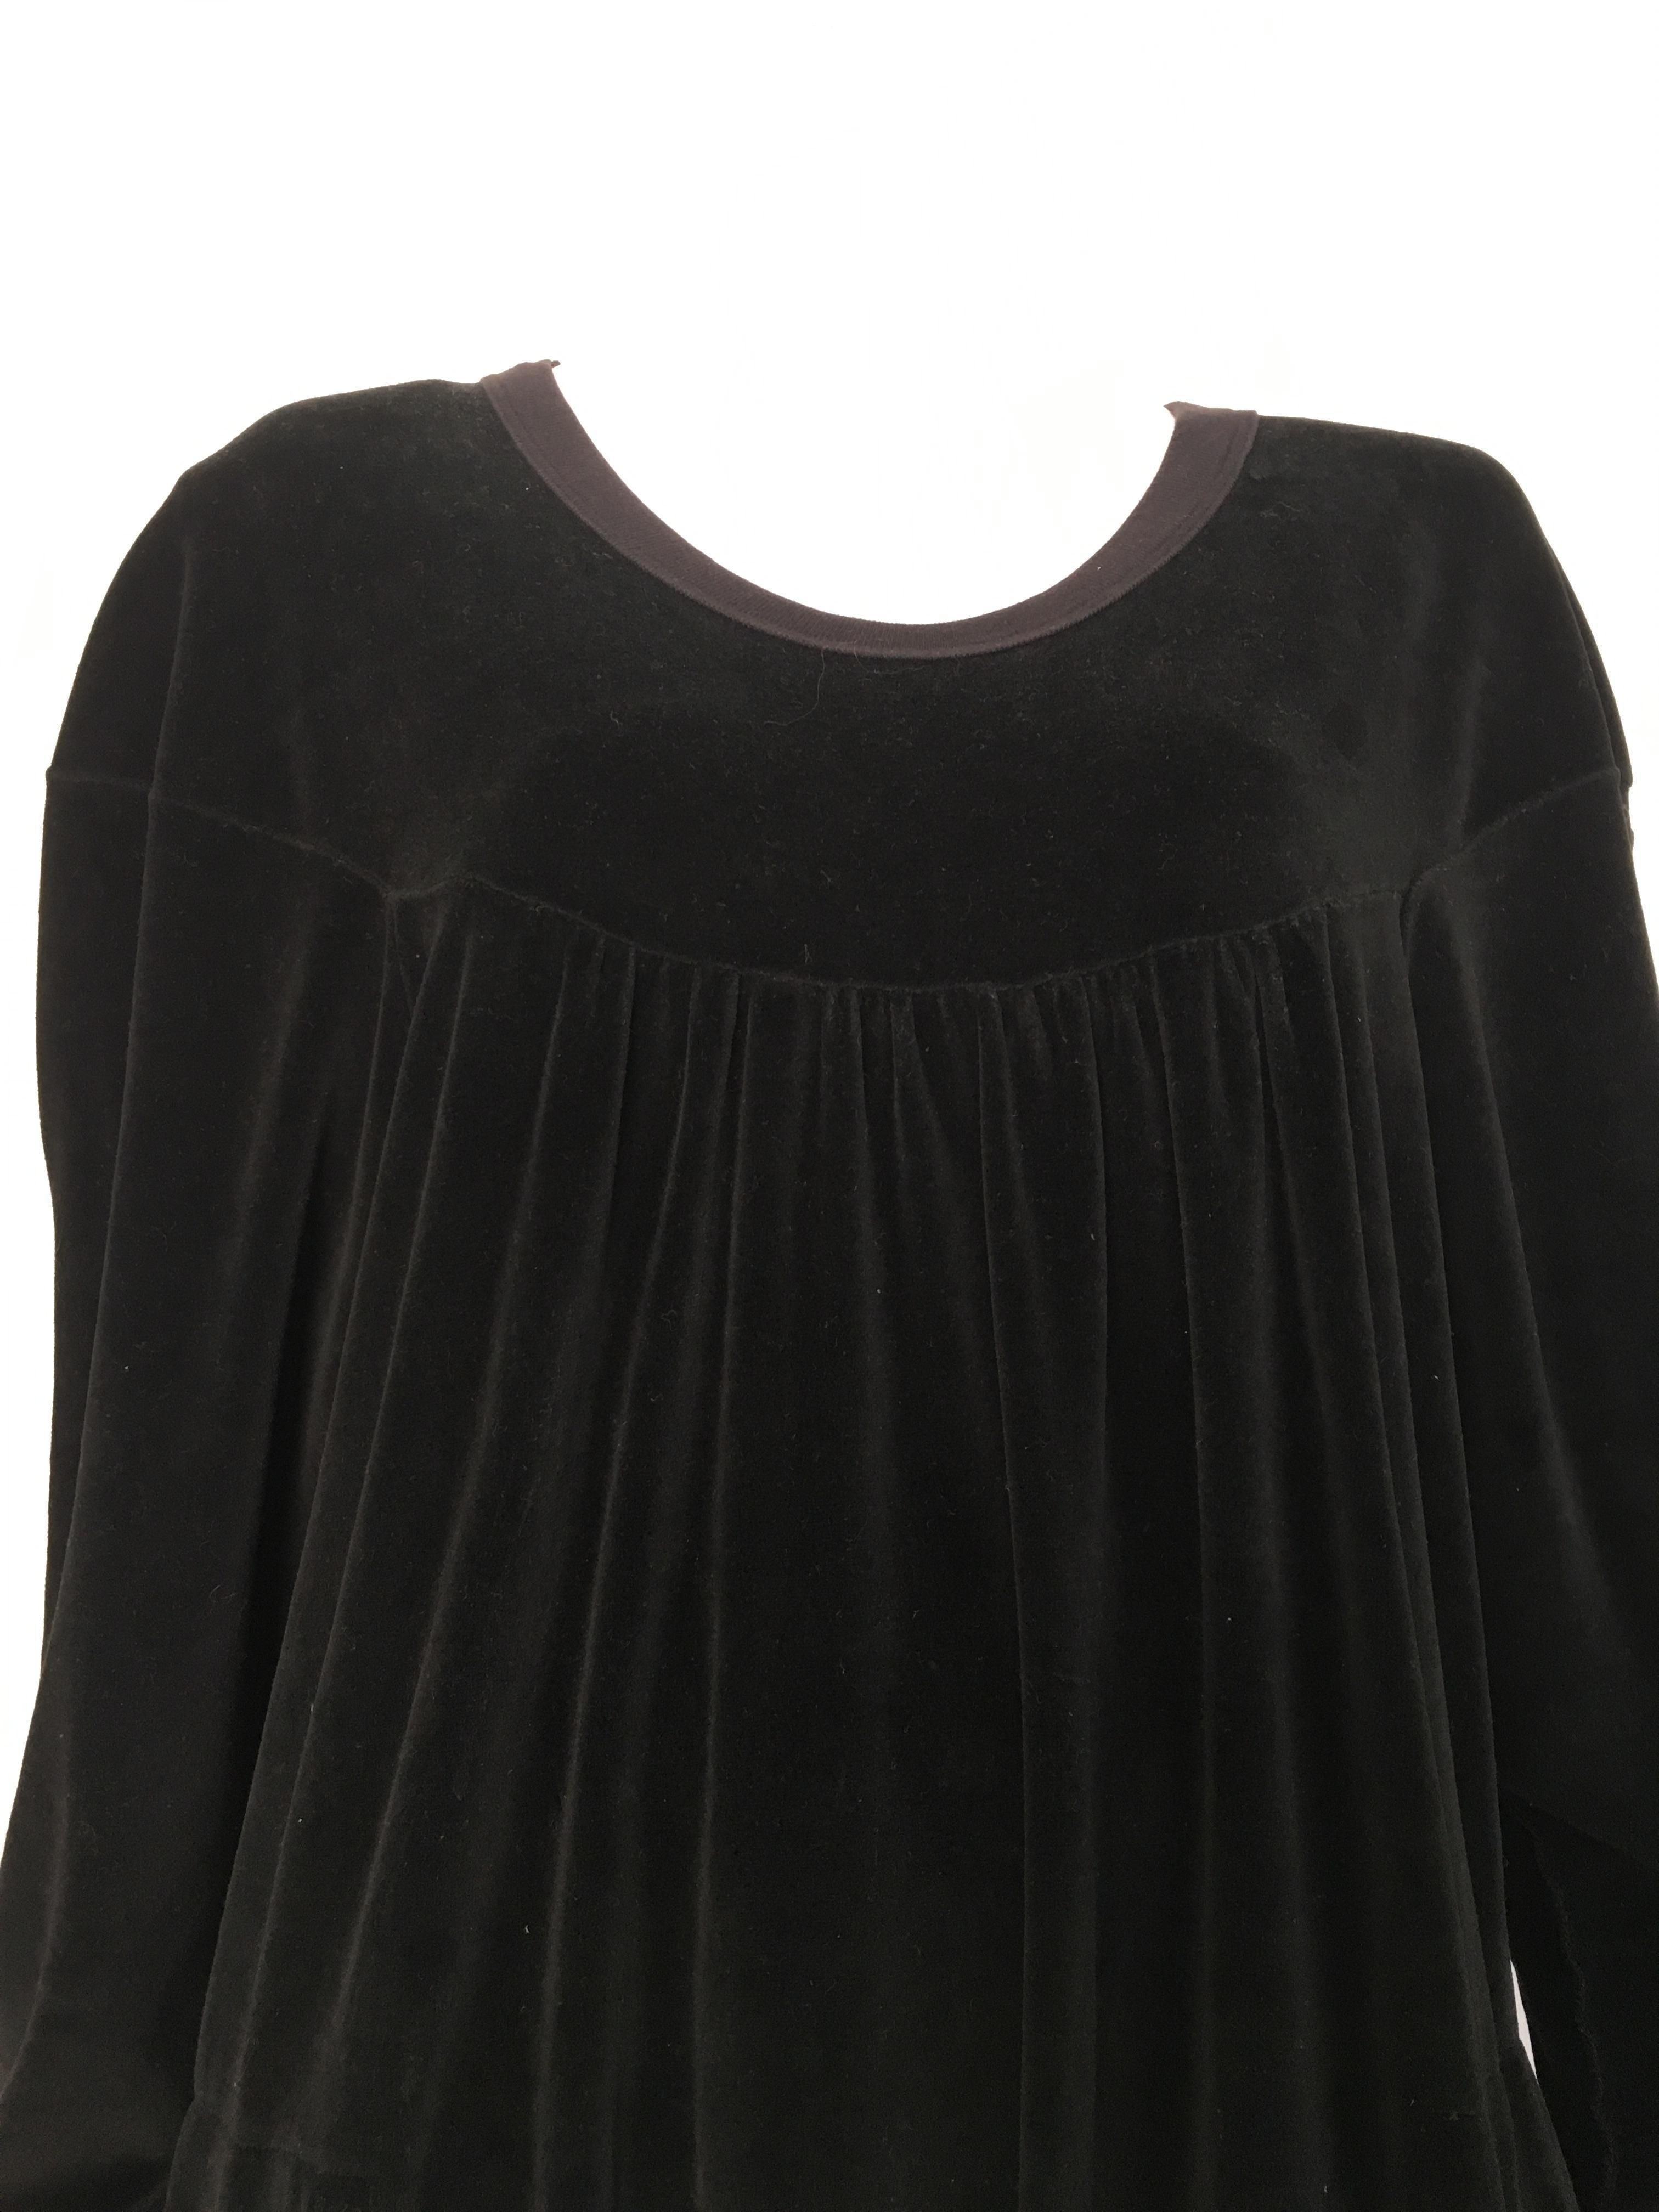 Sonia Rykiel 1980s Black Velour Dress with Pockets & Cardigan Size Large. For Sale 2